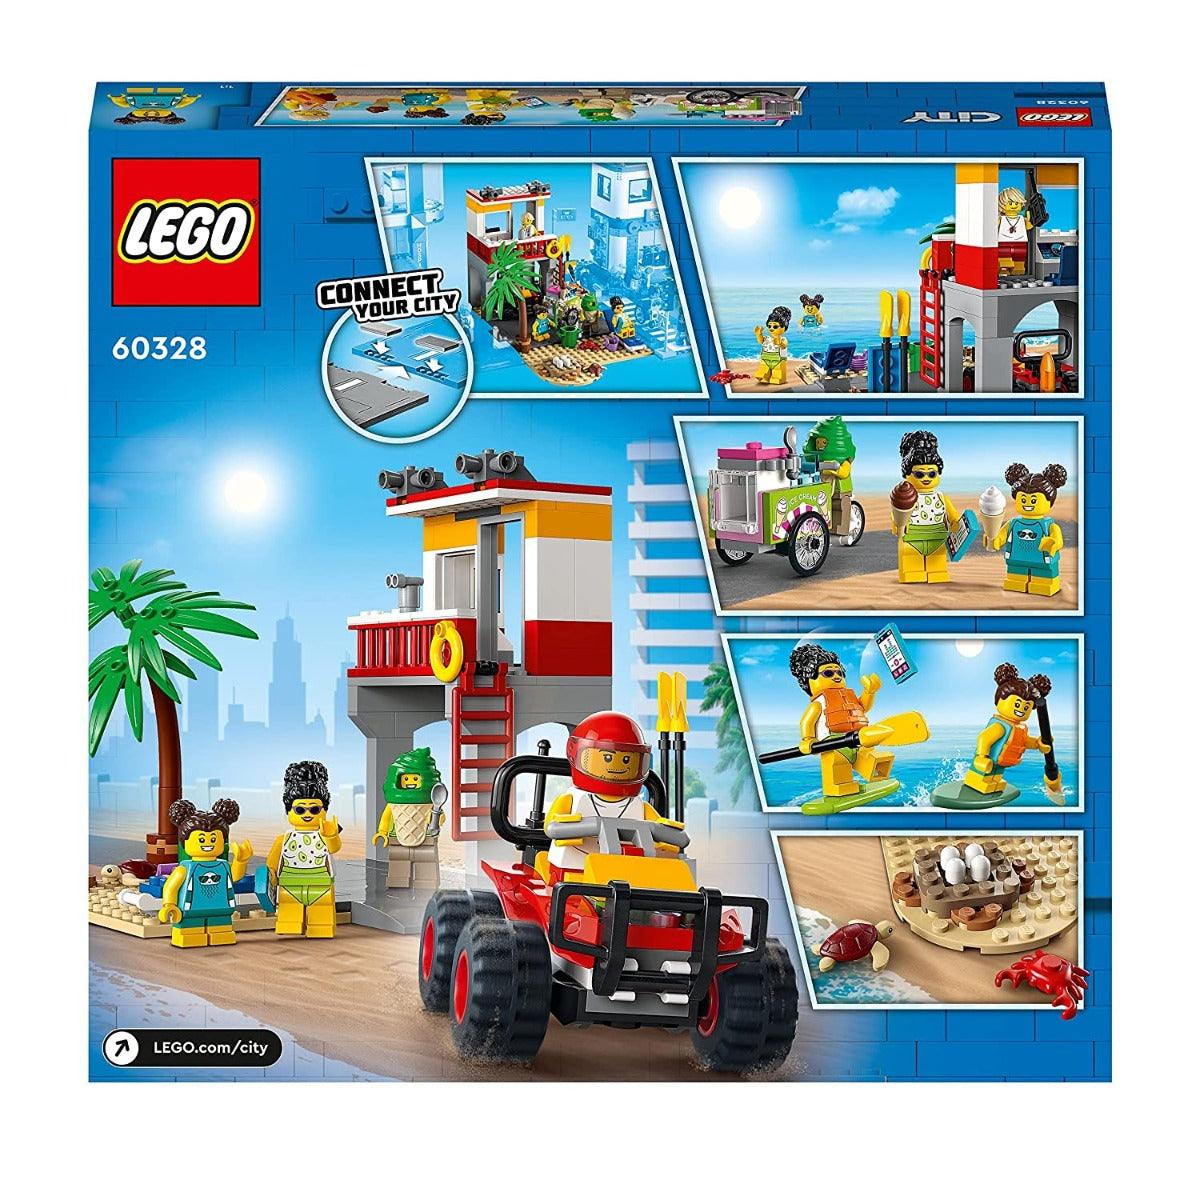 LEGO City Beach Lifeguard Station Building Kit for Ages 5+